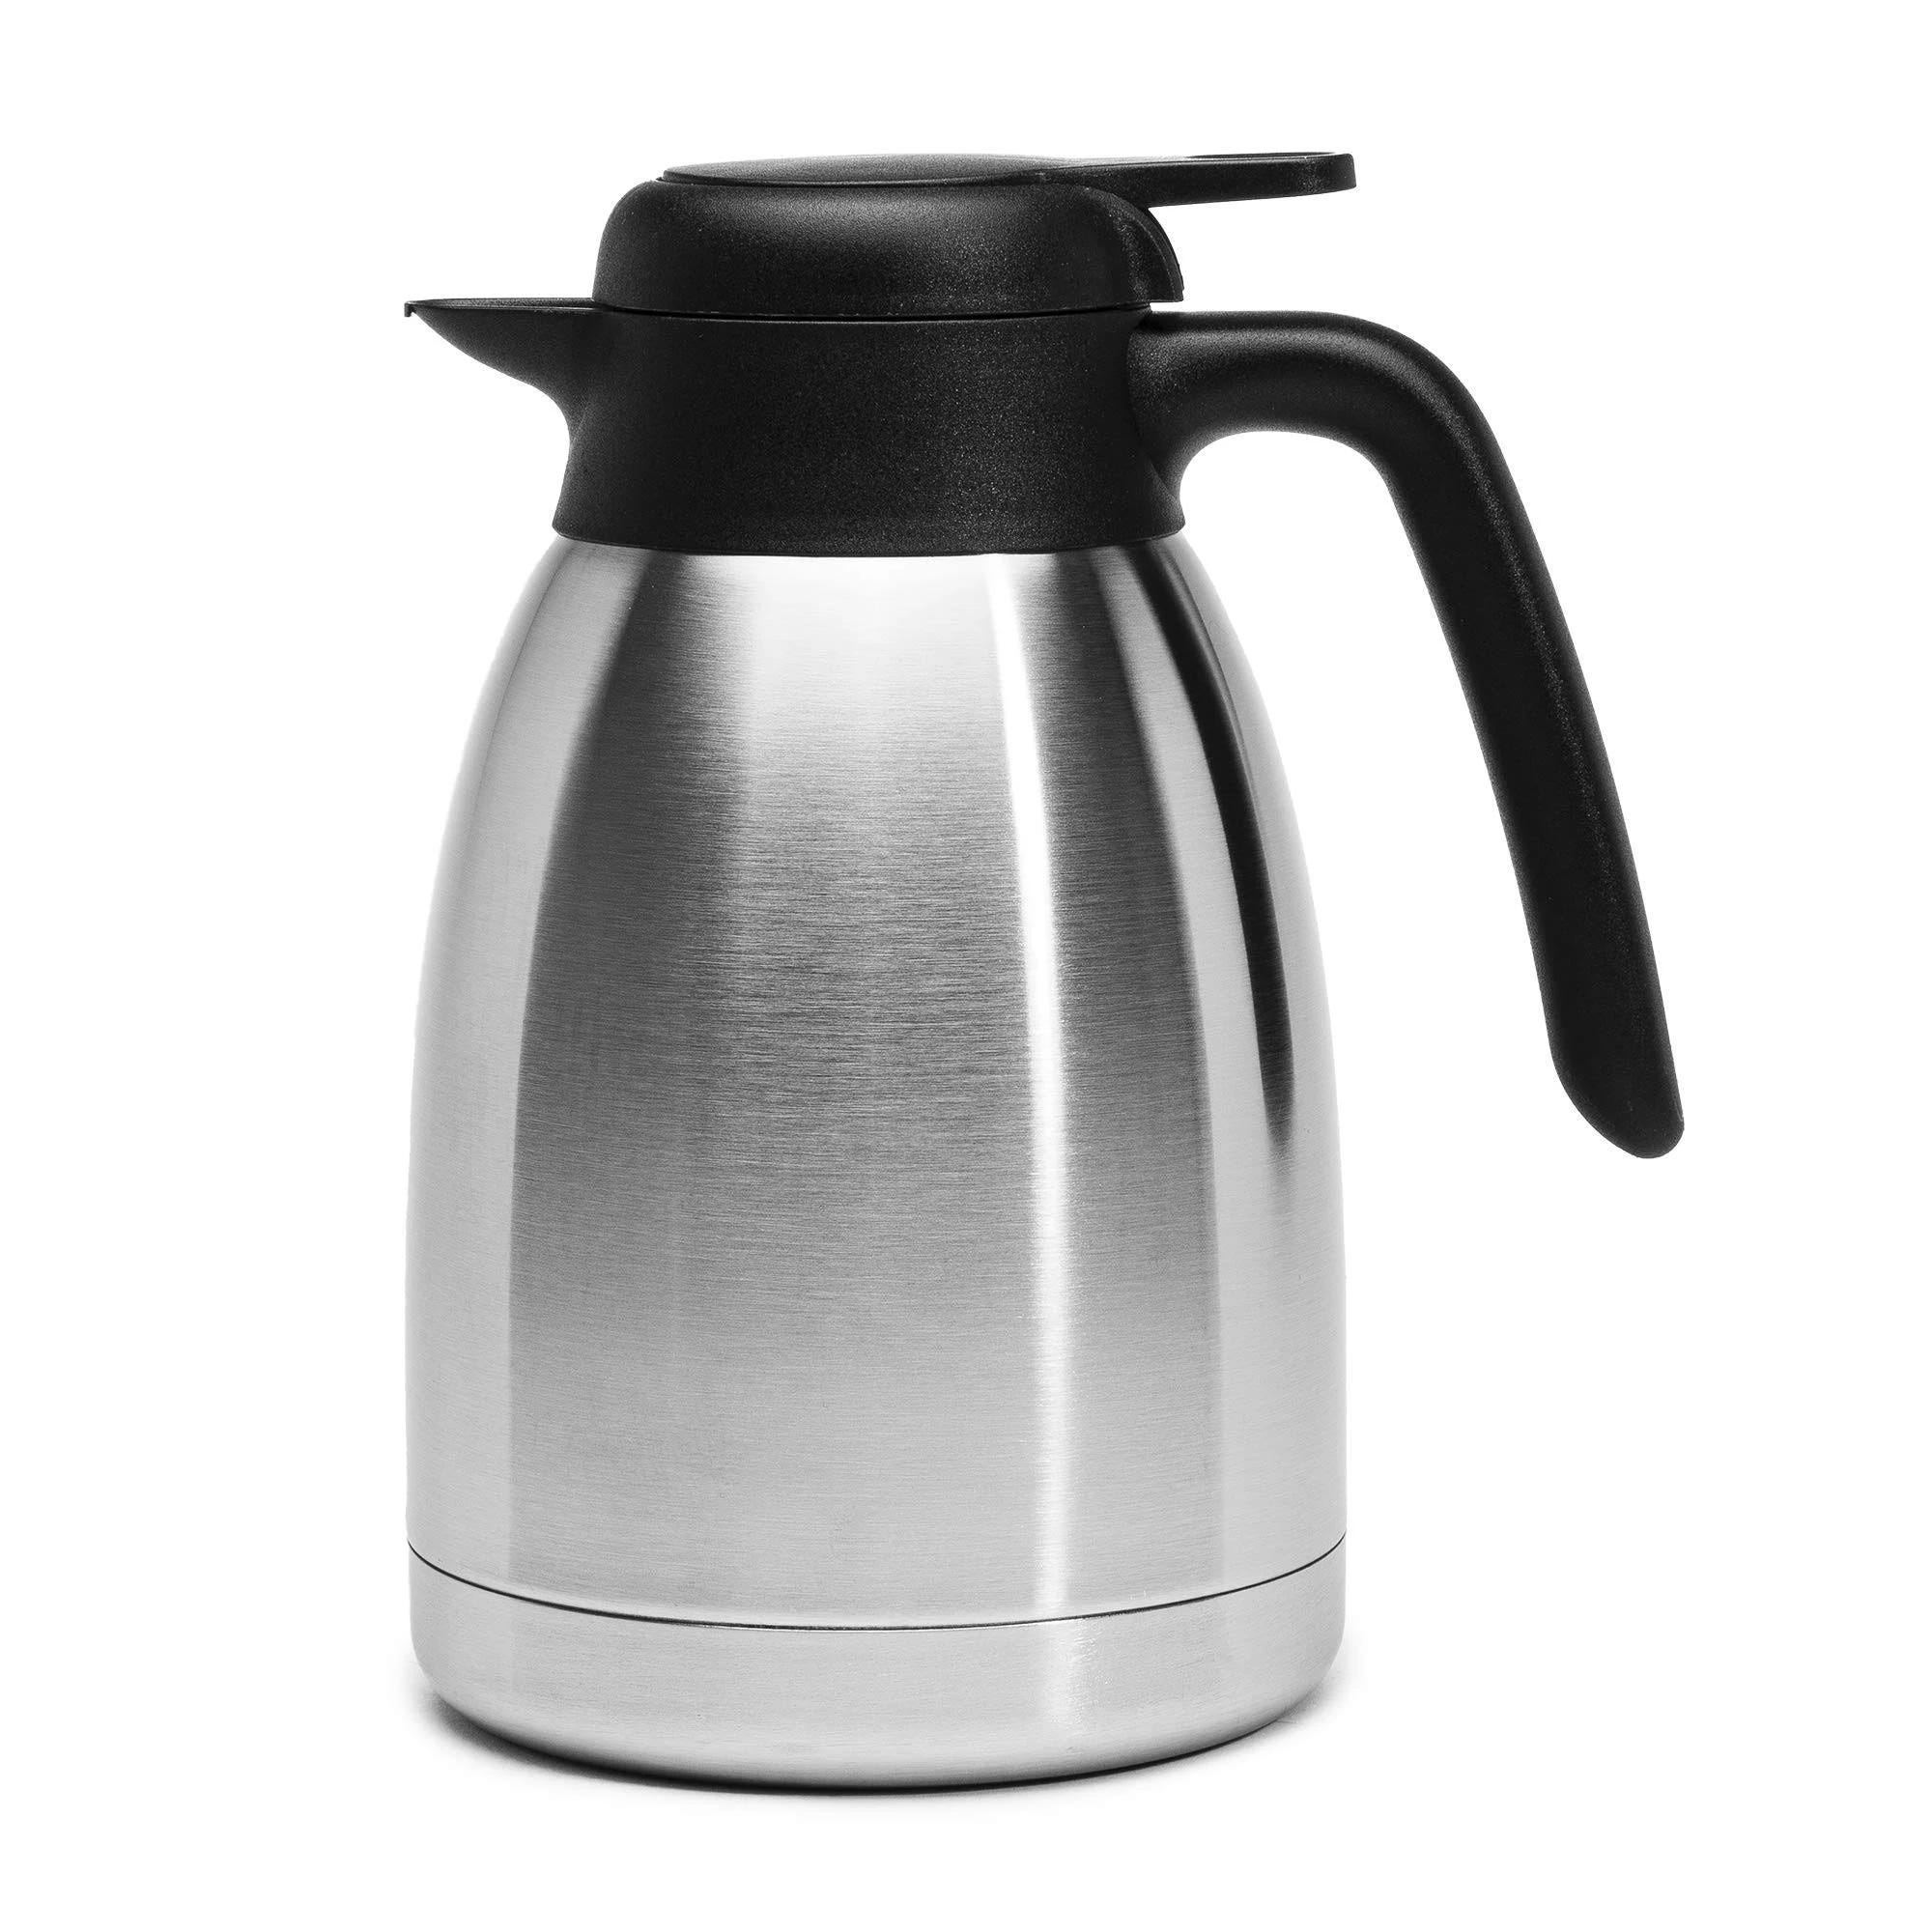 Primula Metro 1.5L Thermal Carafe: Durable and Insulated for Hot or Cold Beverages | Image